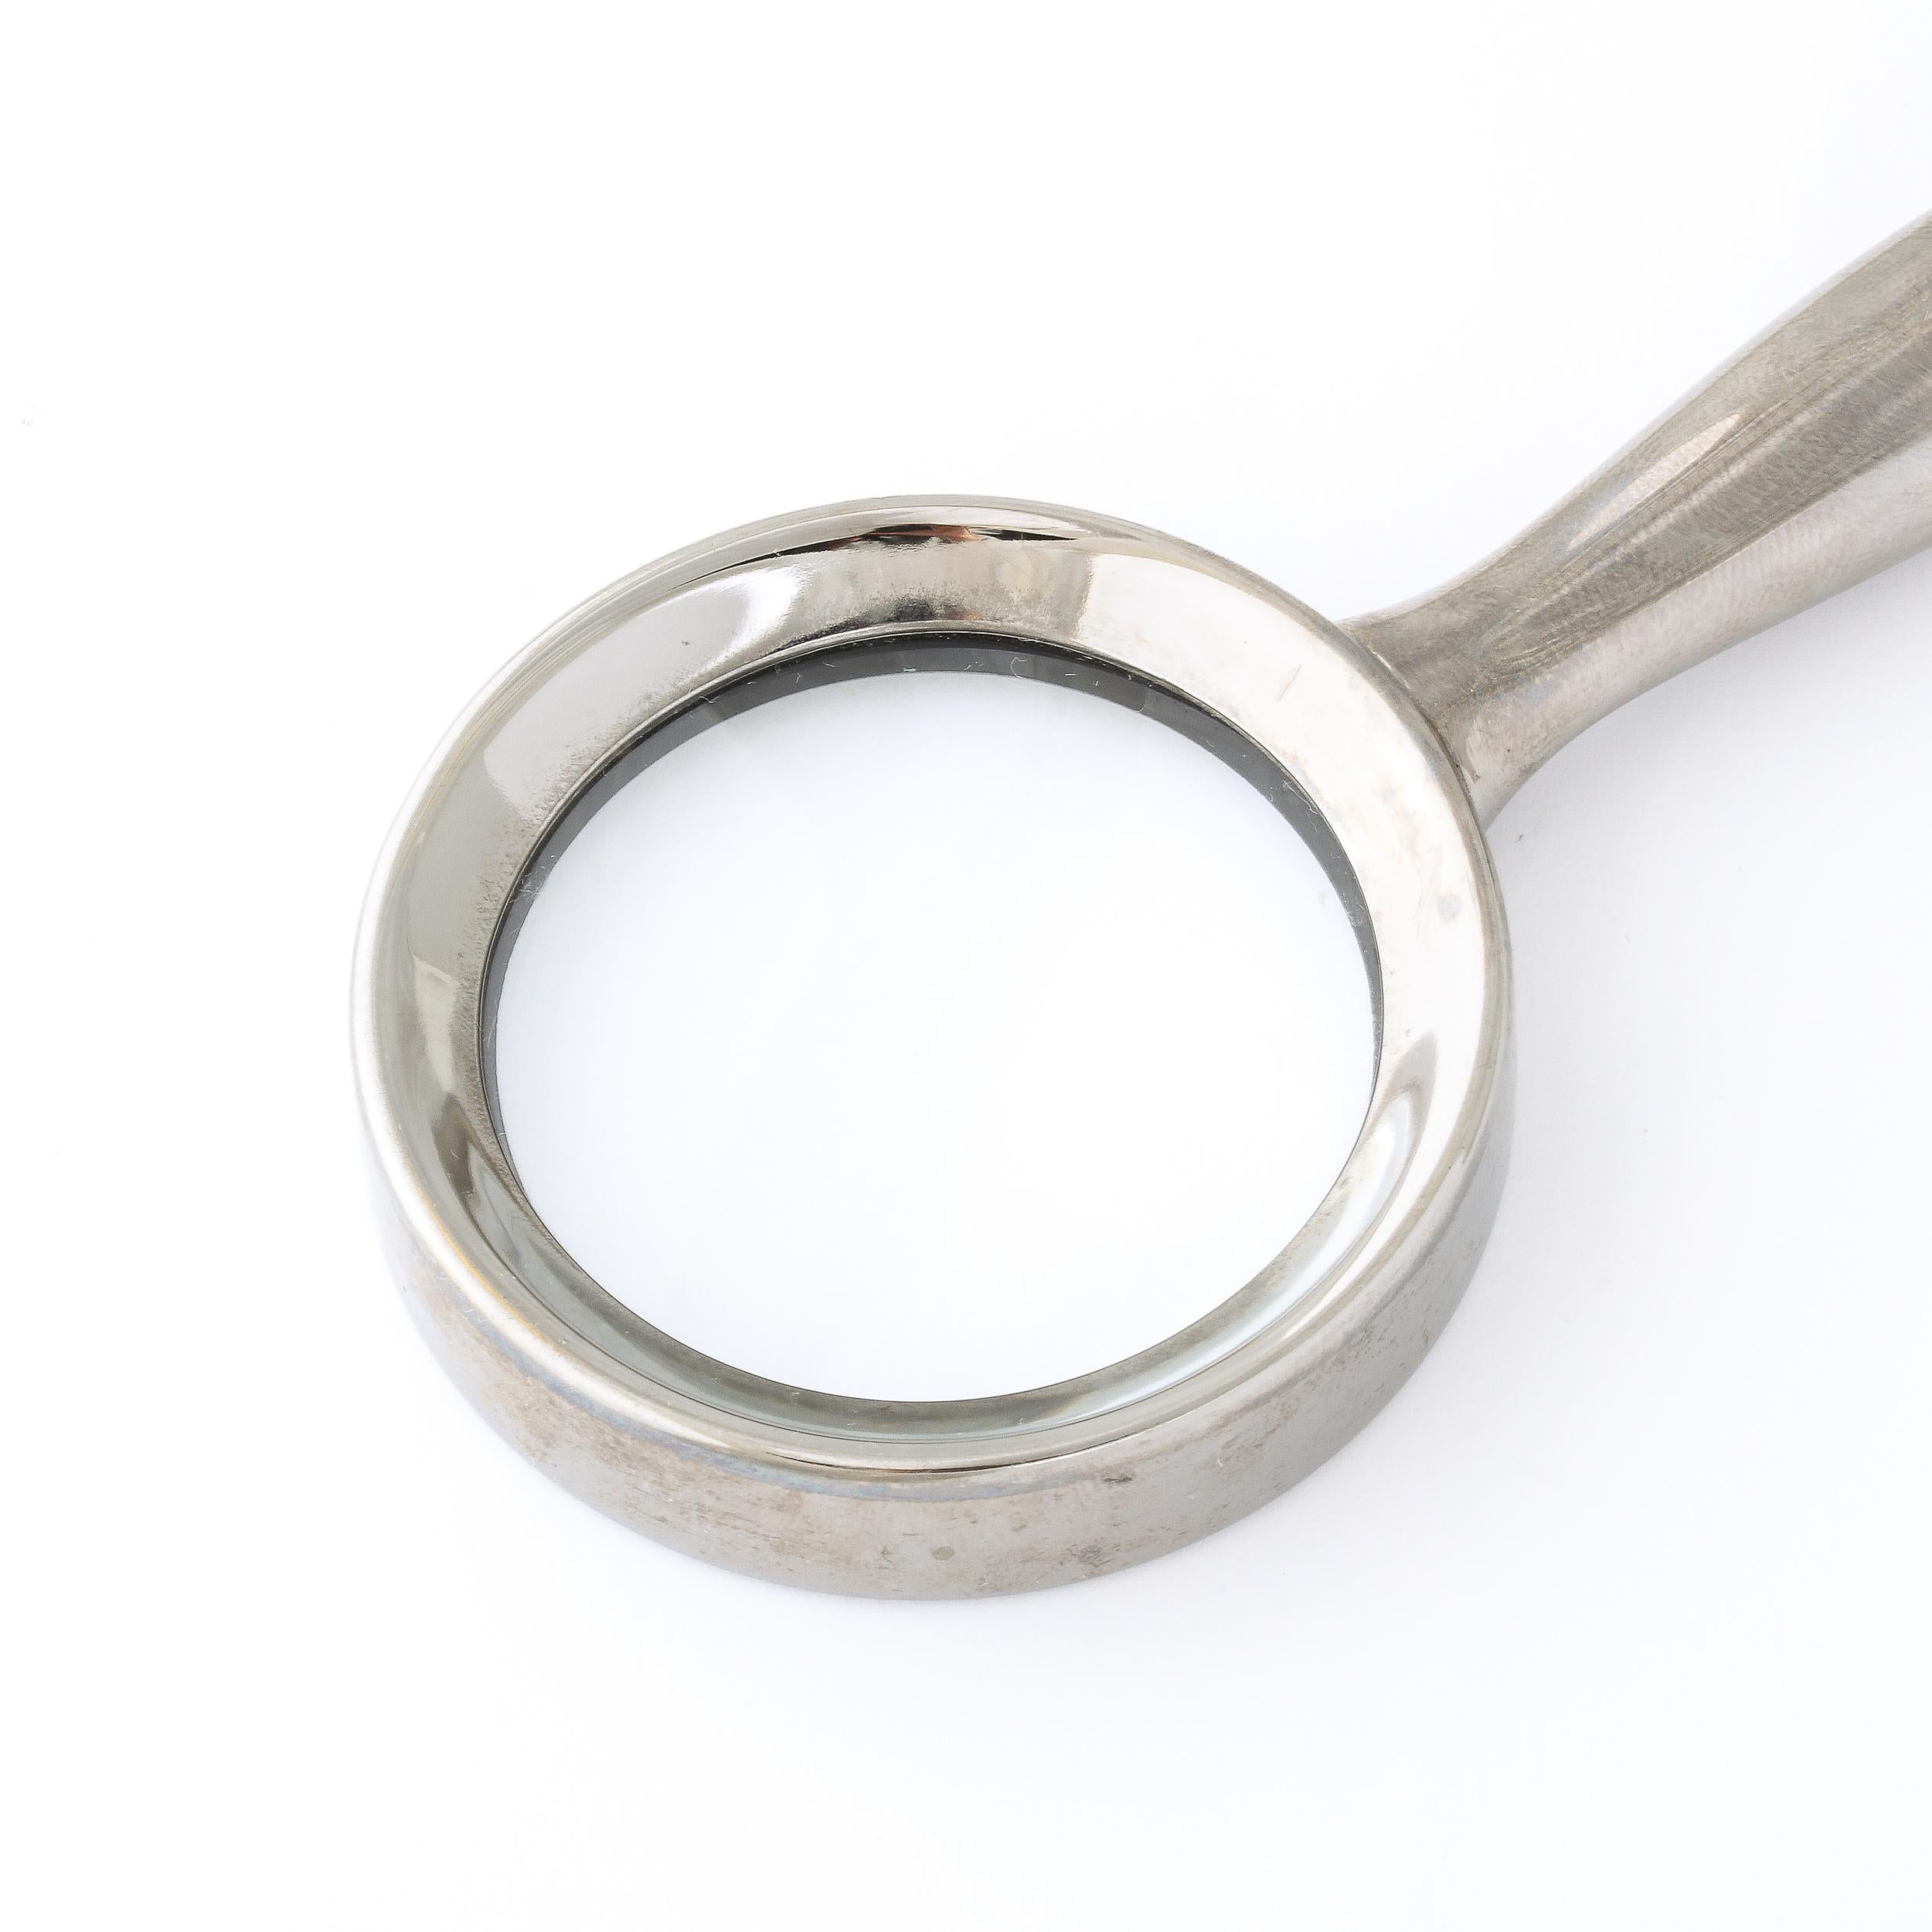 Metal Modernist Magnifying Glass in Gunmetal by Elsa Perretti for Tiffany and Co